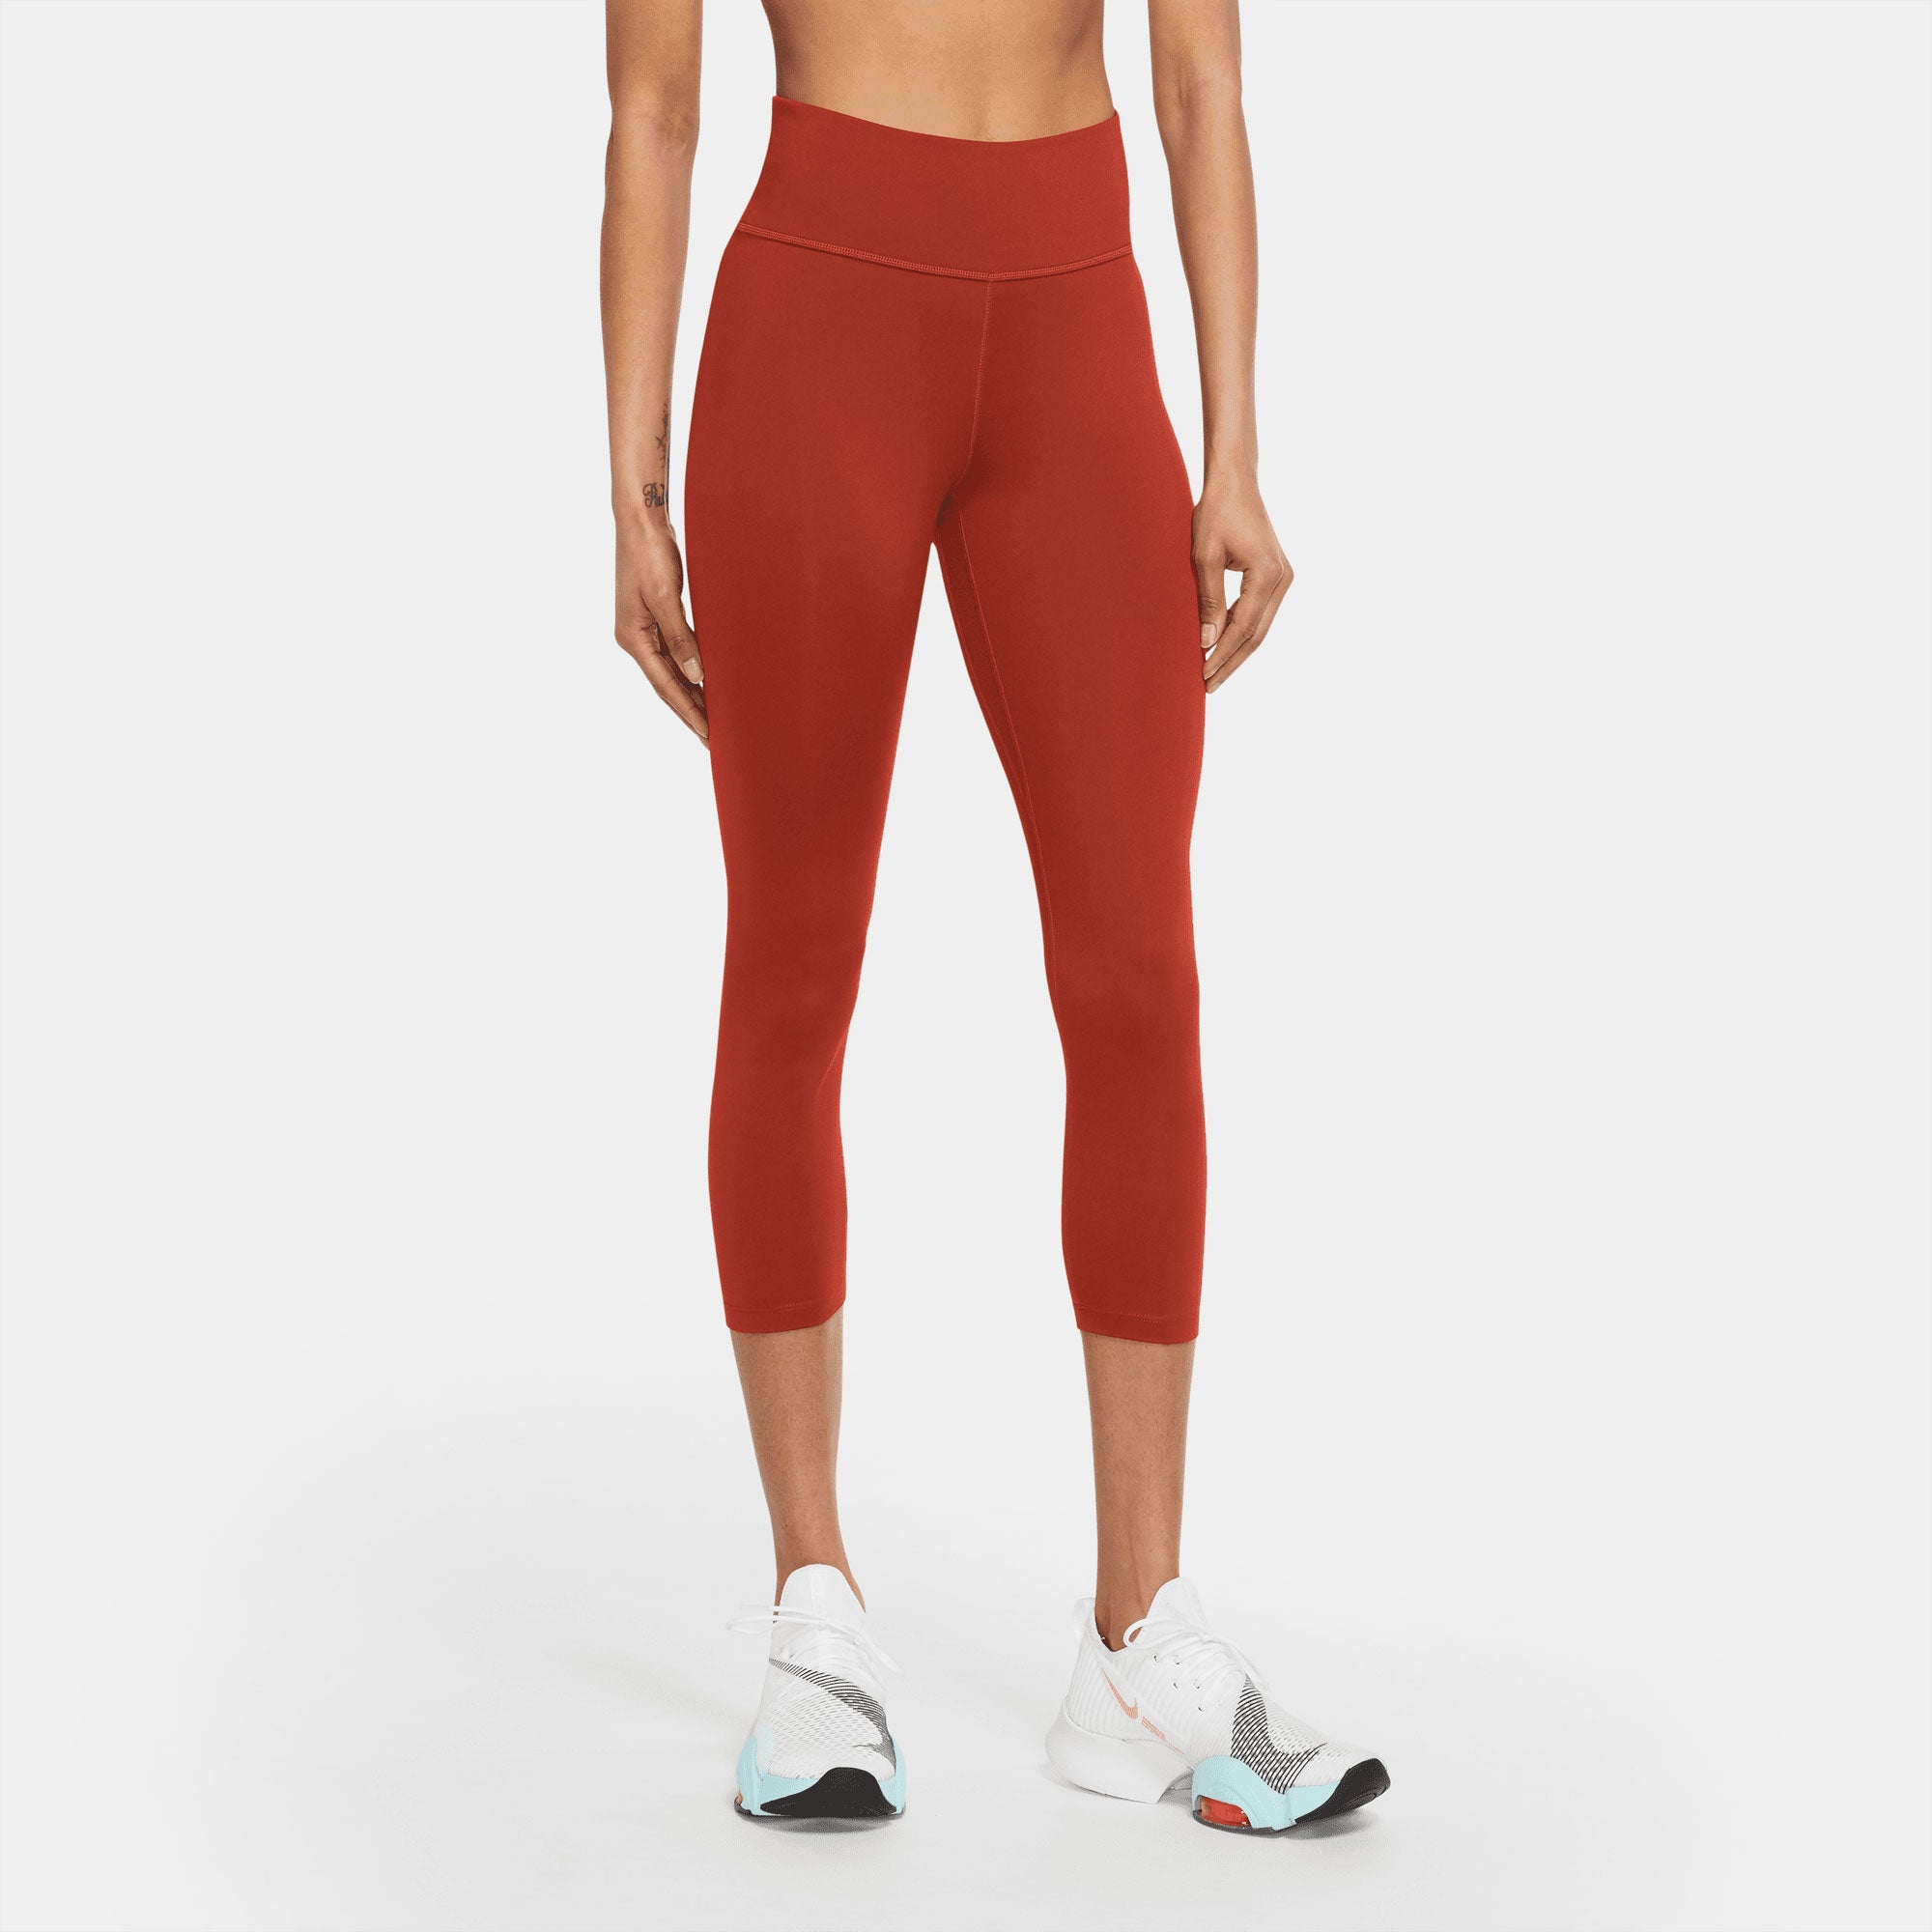 Nike One Dri-FIT Women's Mid-Rise Crop Tights - Red